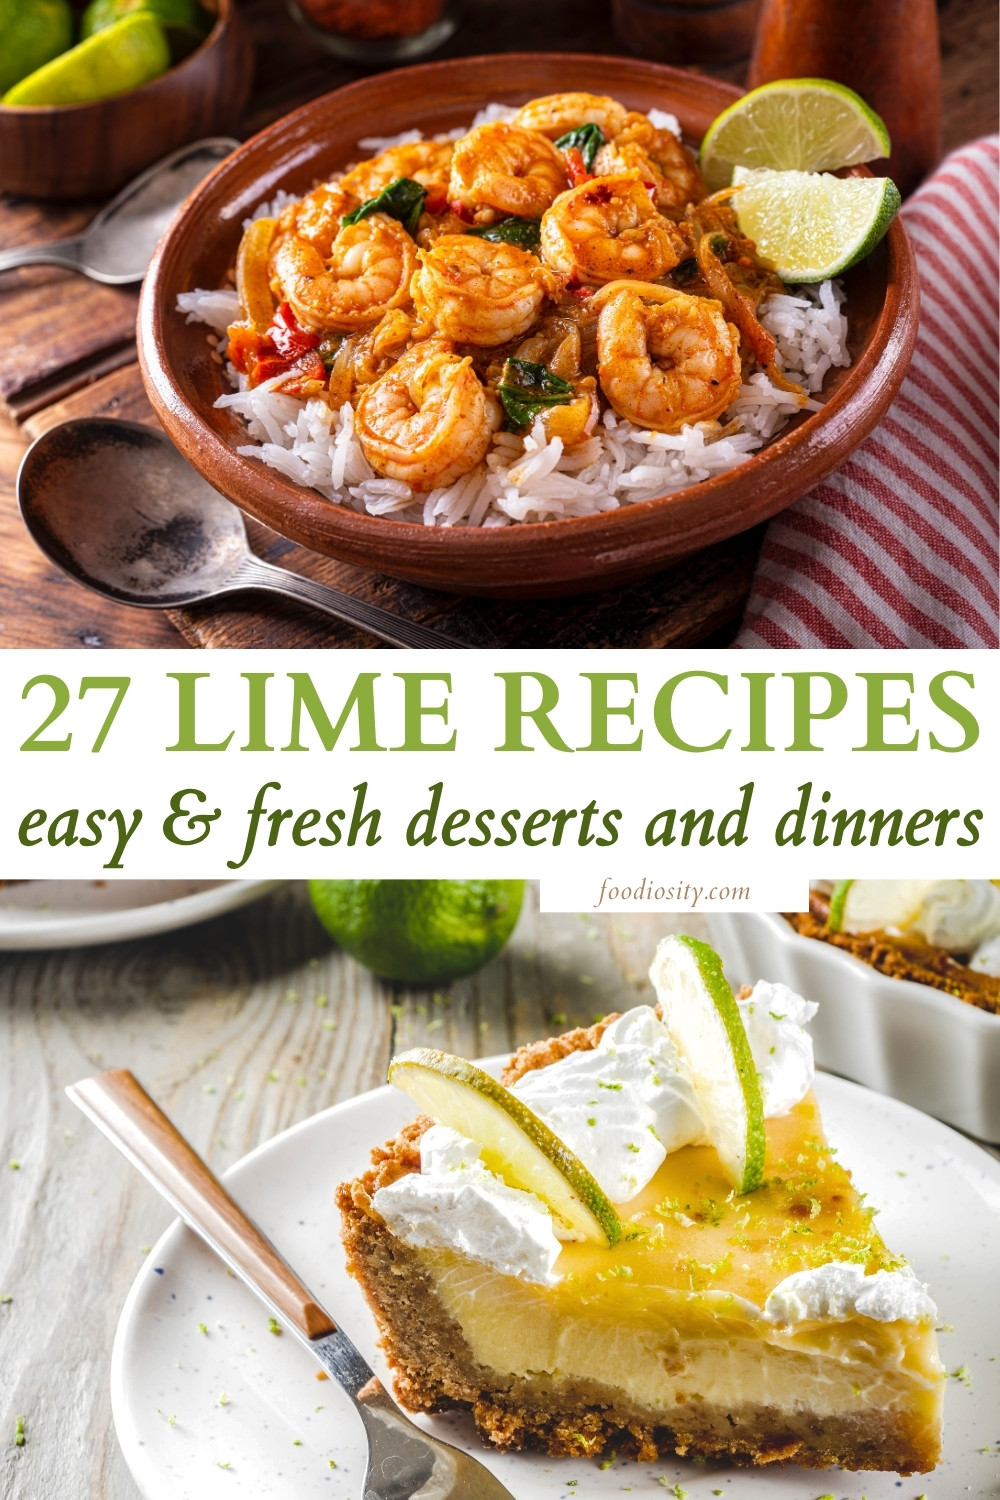 27 lime recipes 1